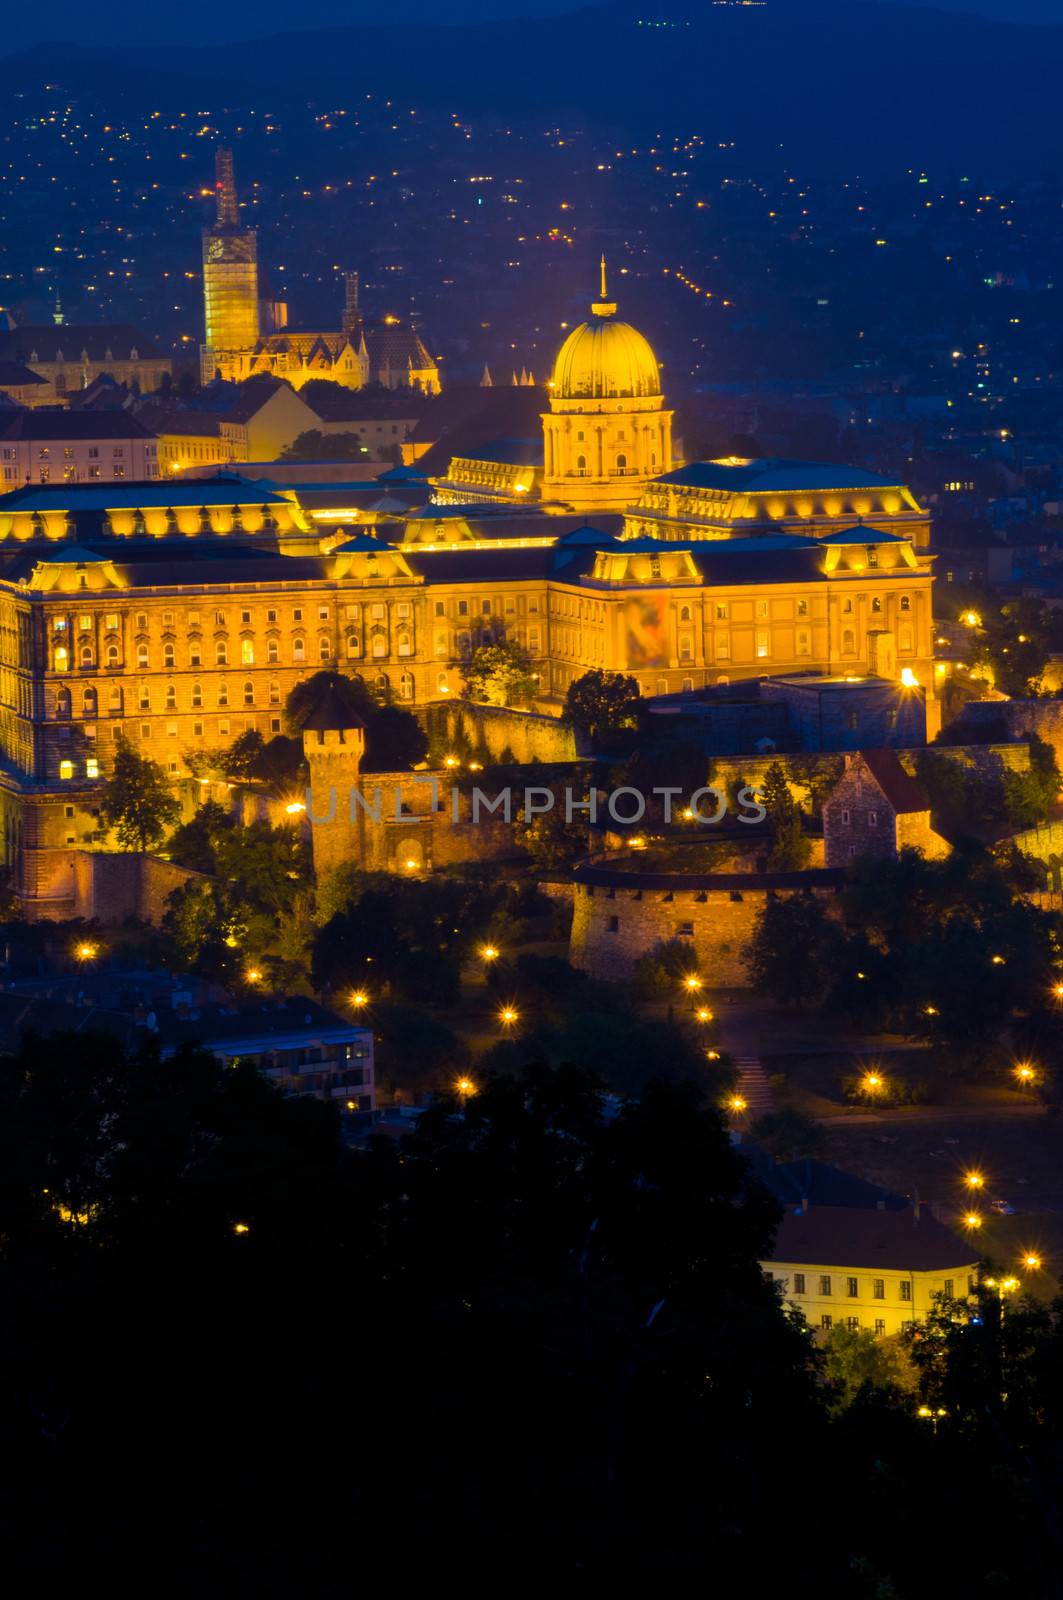 view of the castle of Budapest, Hungary